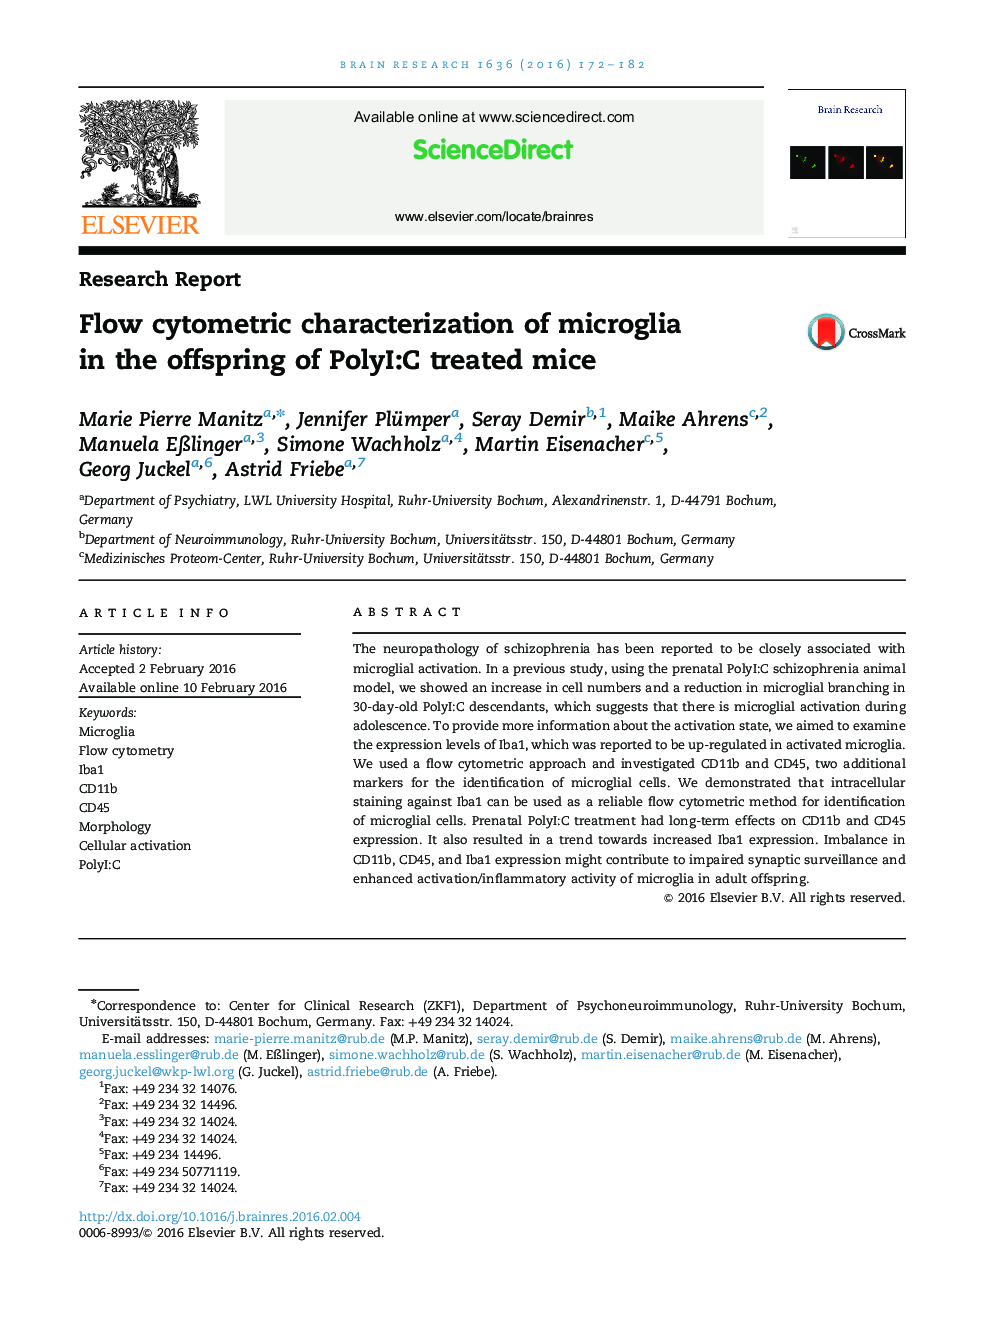 Research ReportFlow cytometric characterization of microglia in the offspring of PolyI:C treated mice